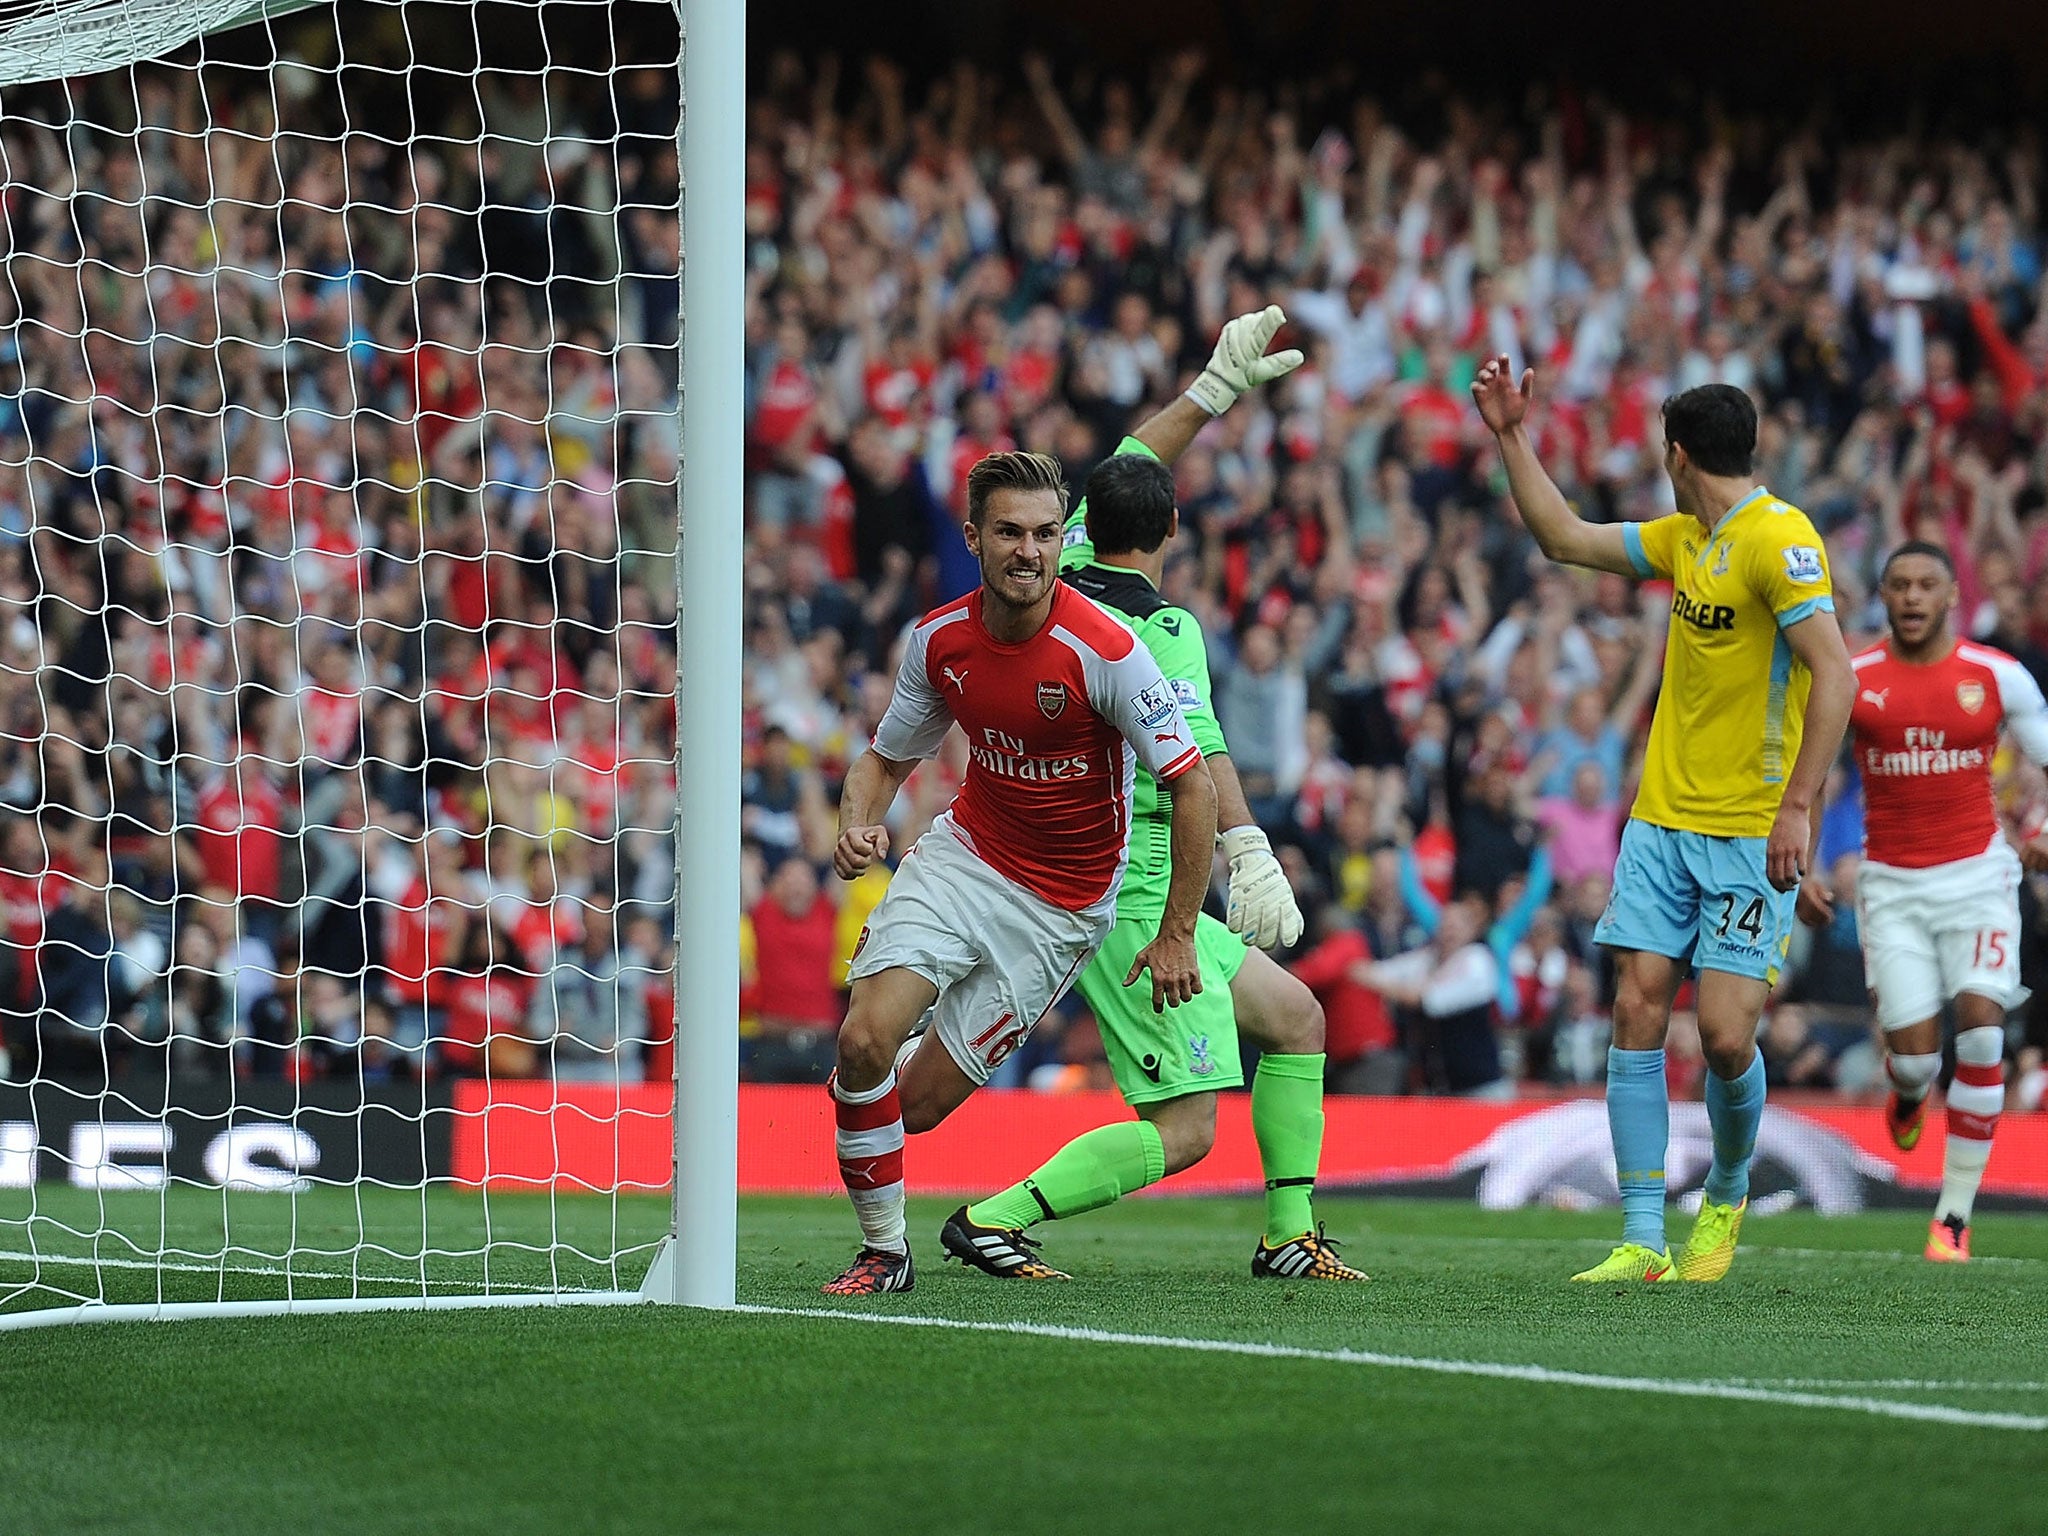 Aaron Ramsey knocks in the winning goal to give Arsenal a 2-1 victory over Crystal Palace on Saturday